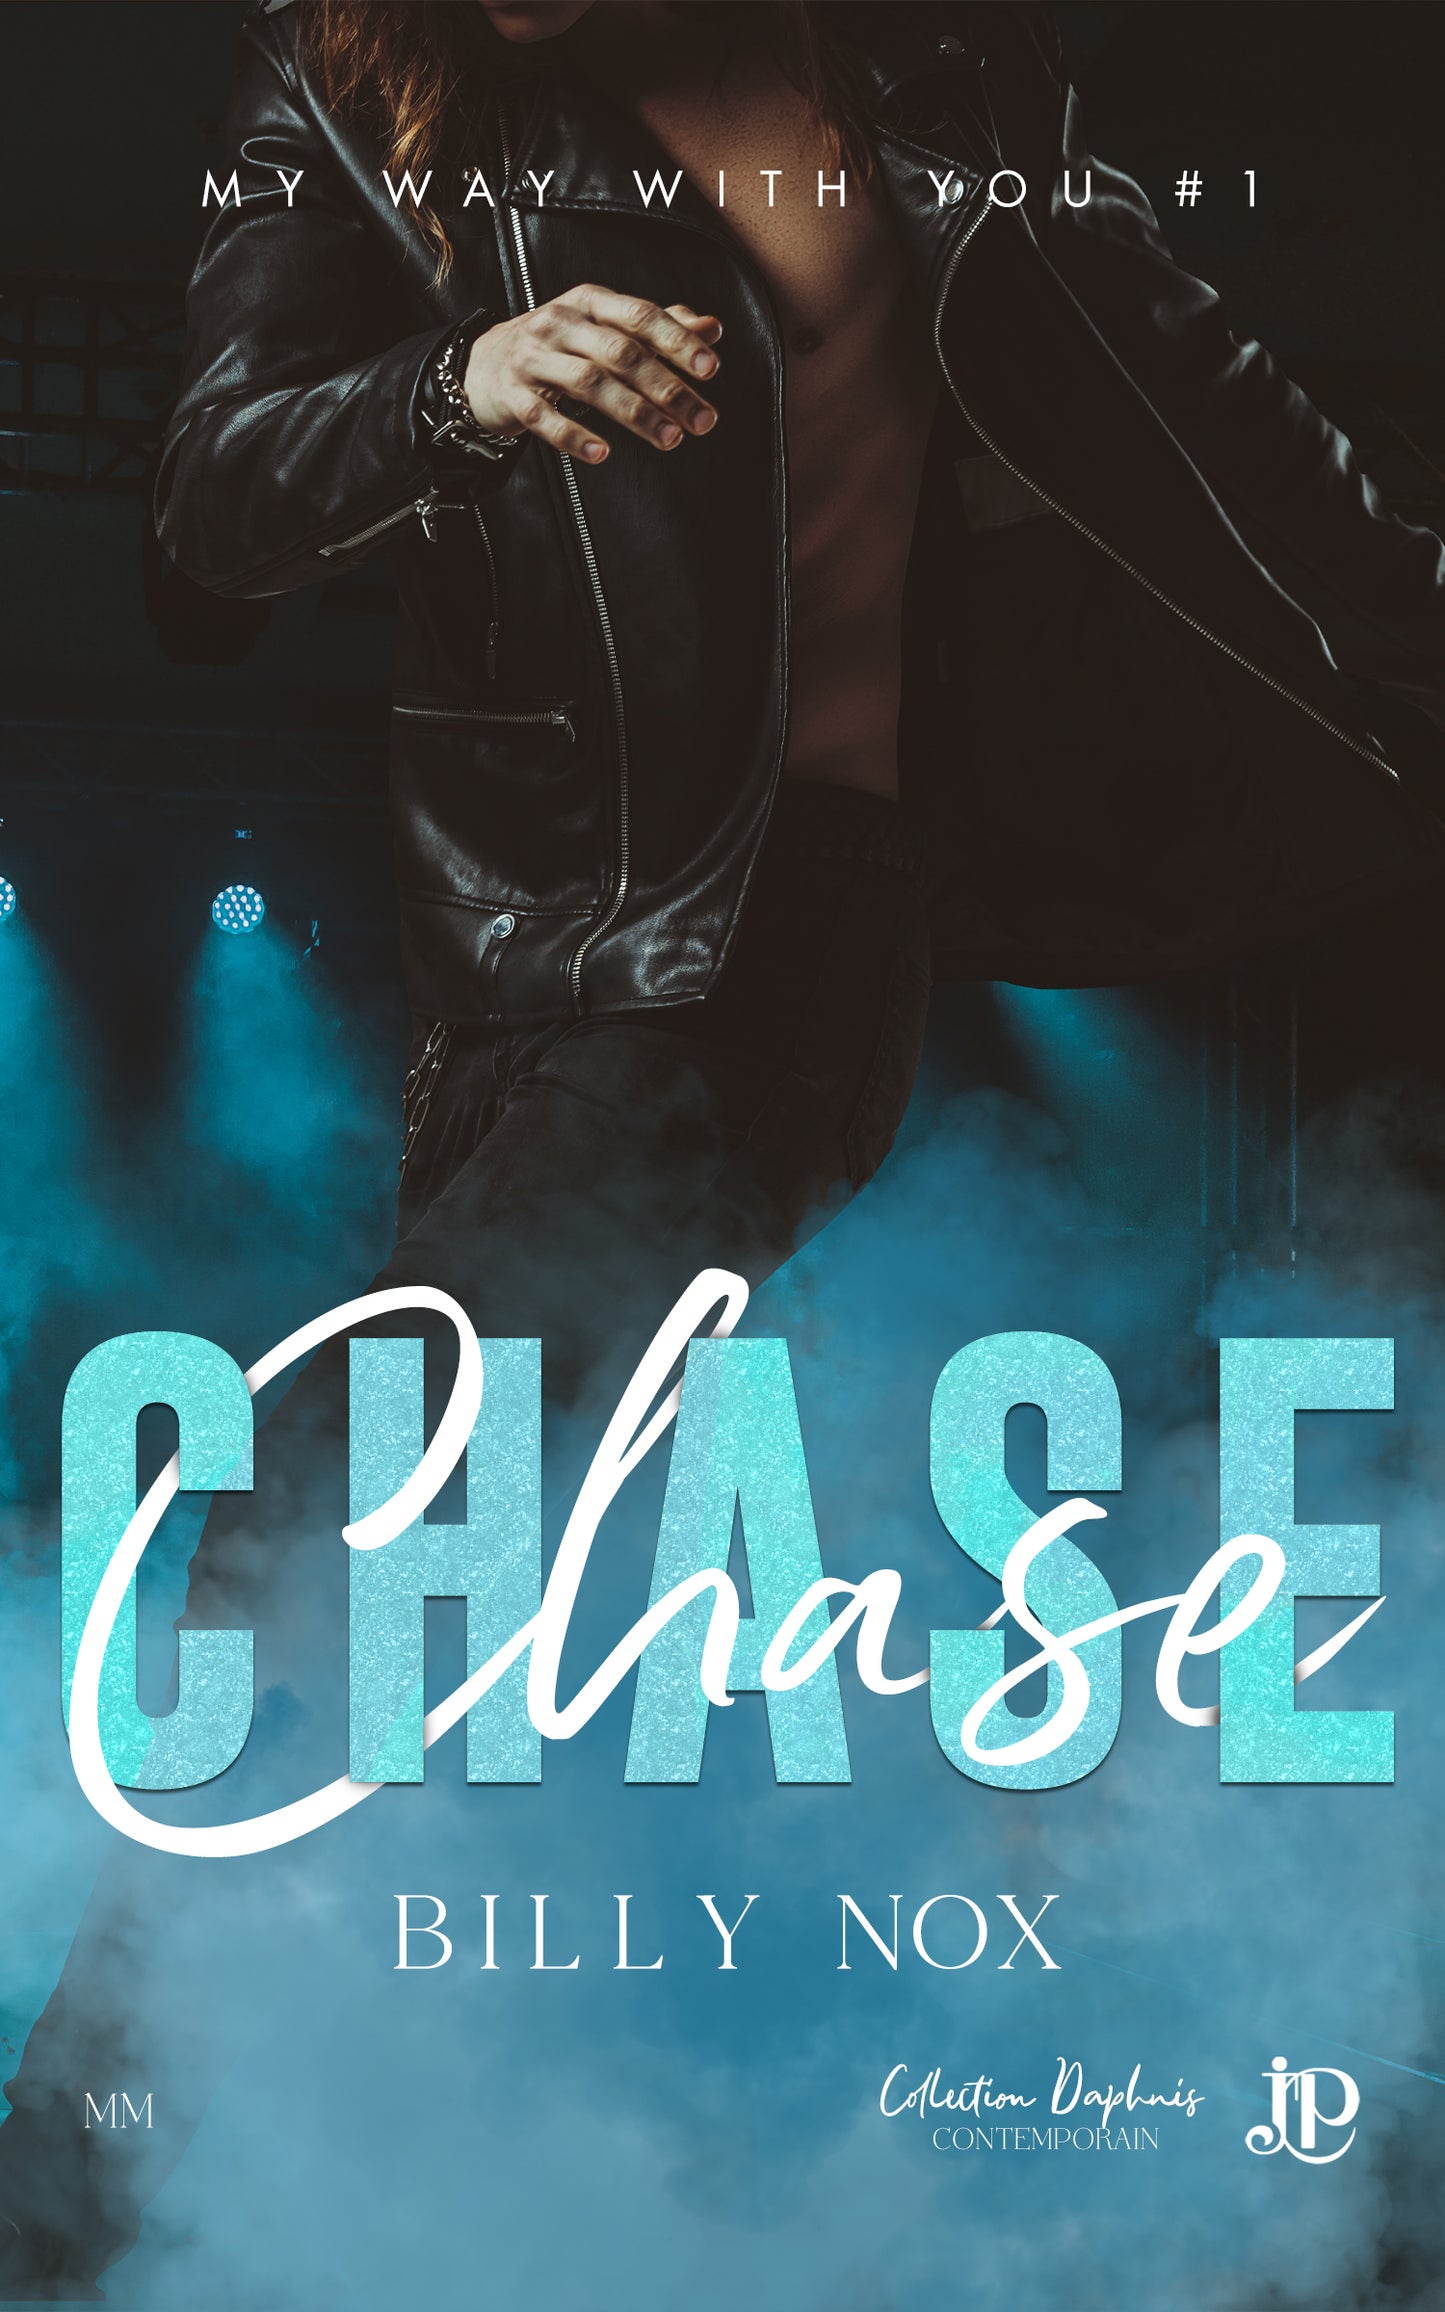 My way with you #1 : Chase